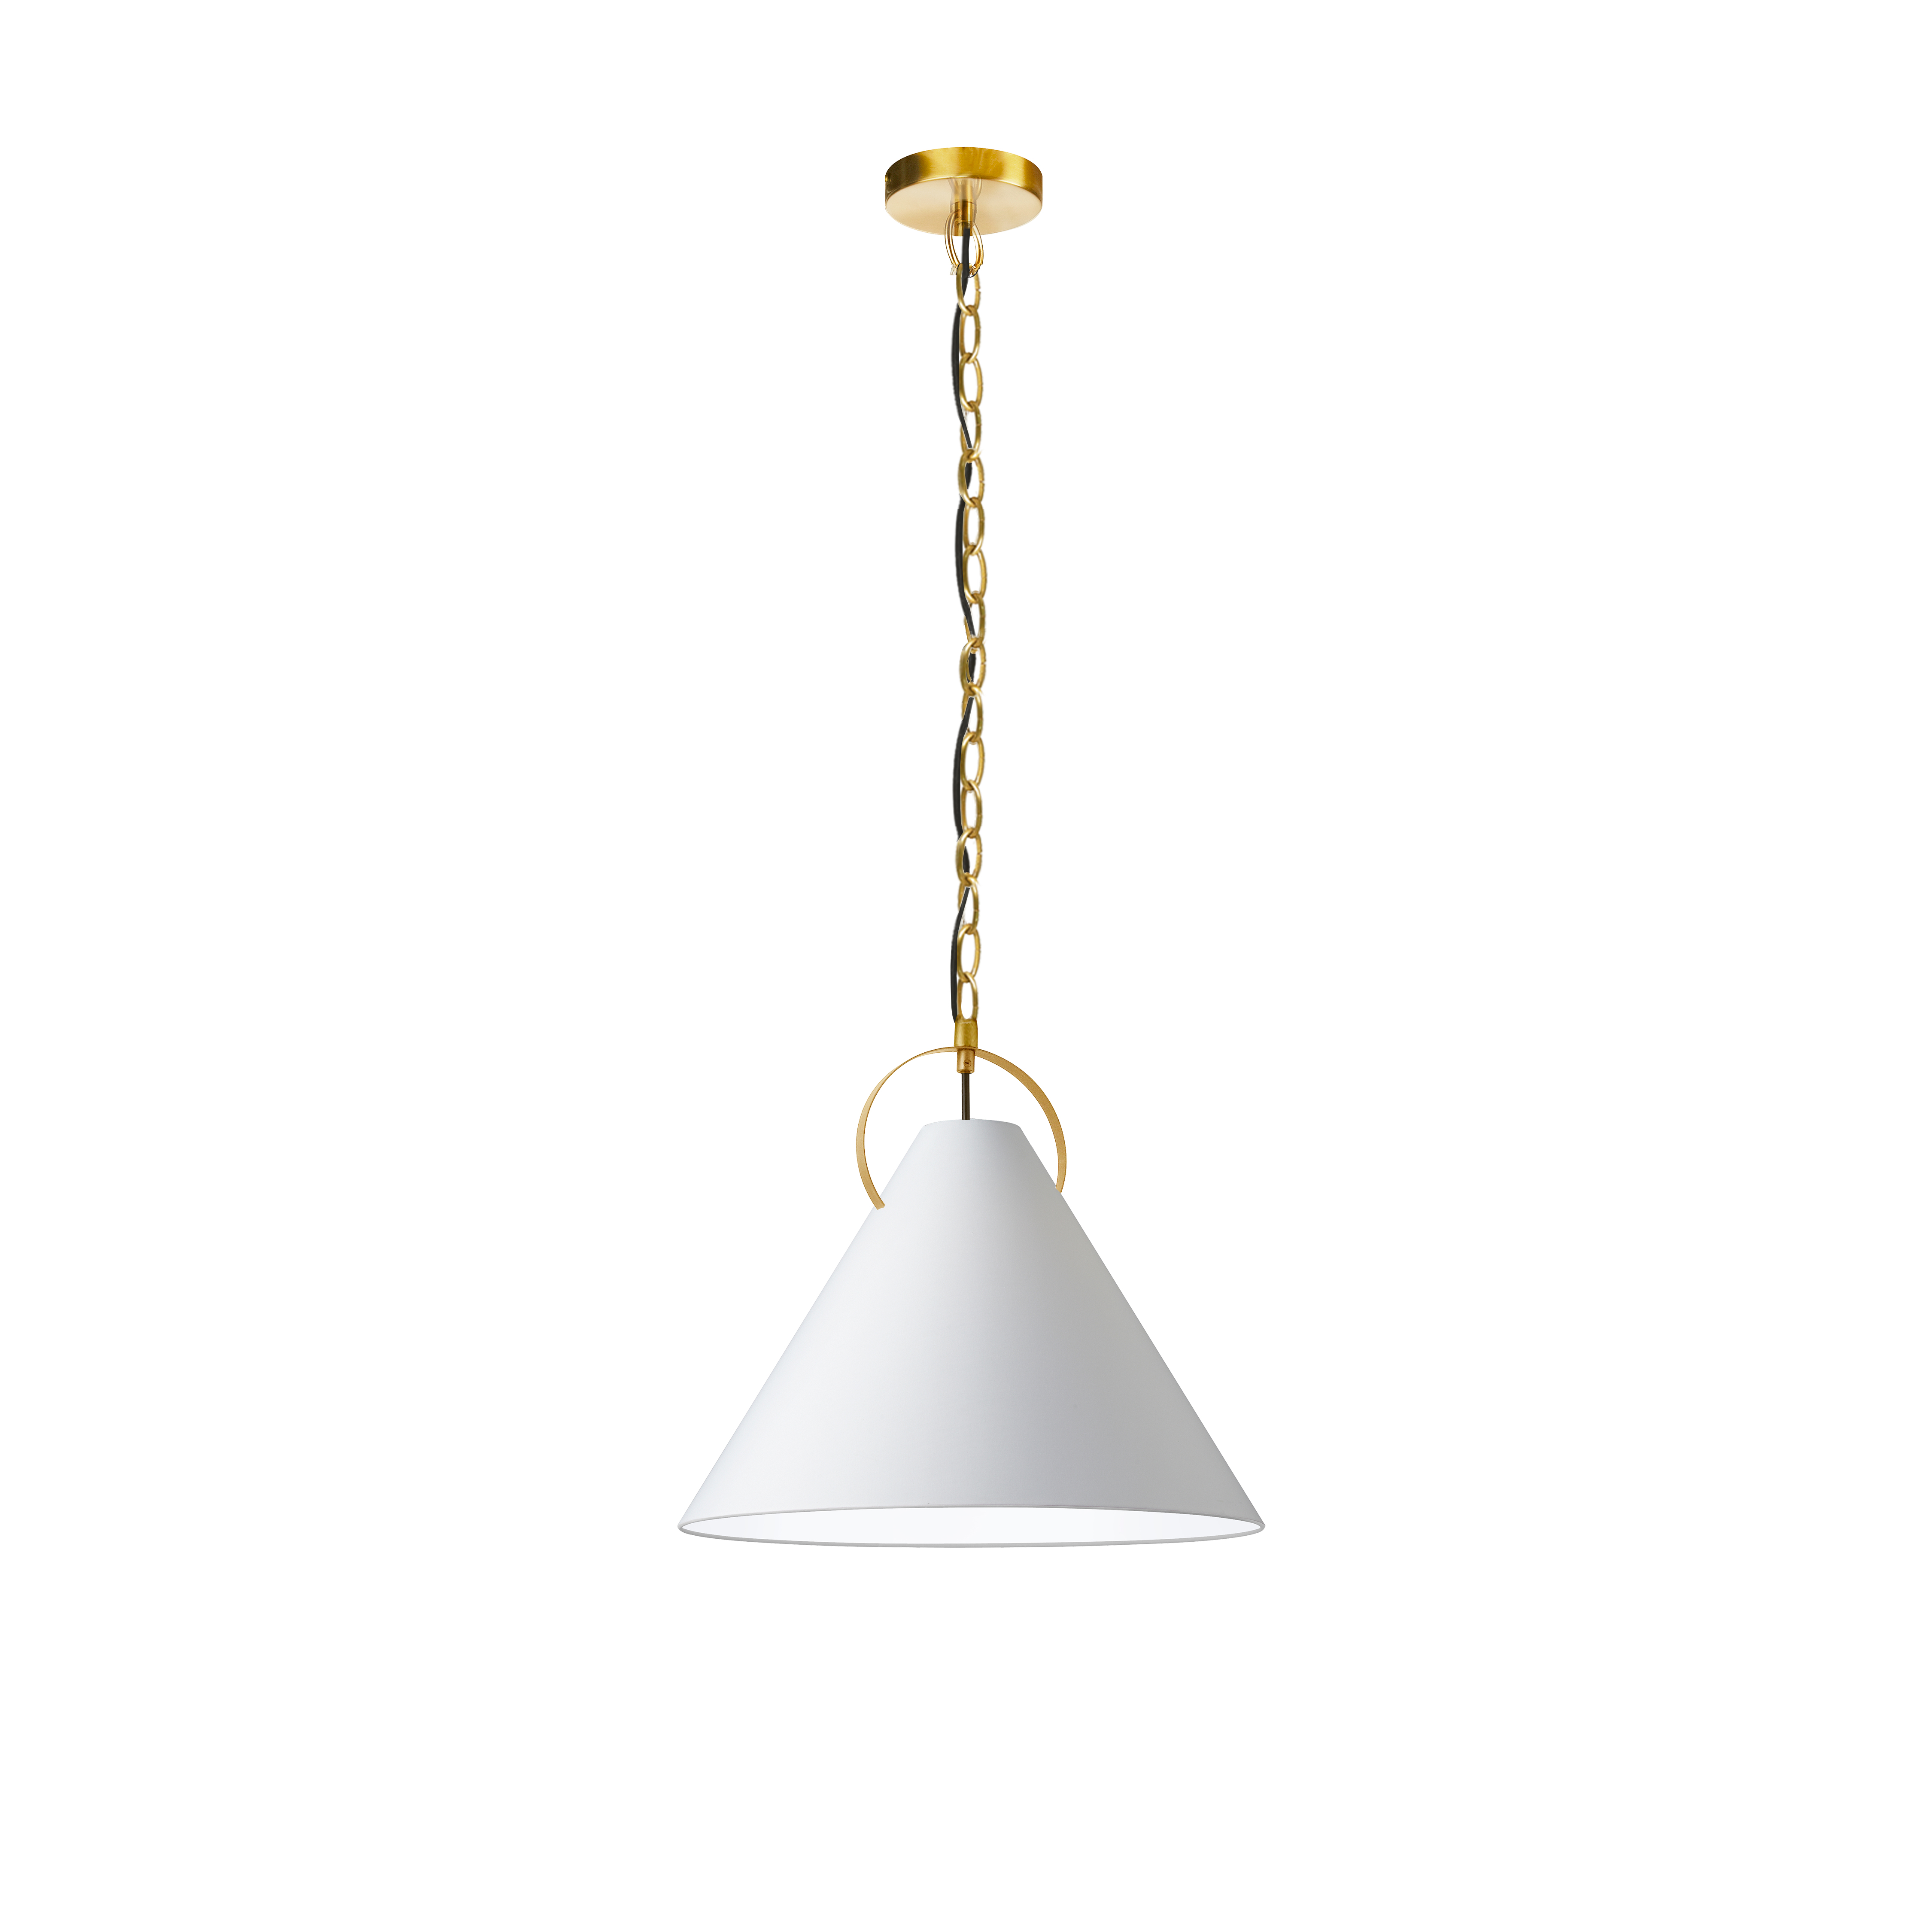 1 Light Incandescent Pendant, Aged Brass with White Shade